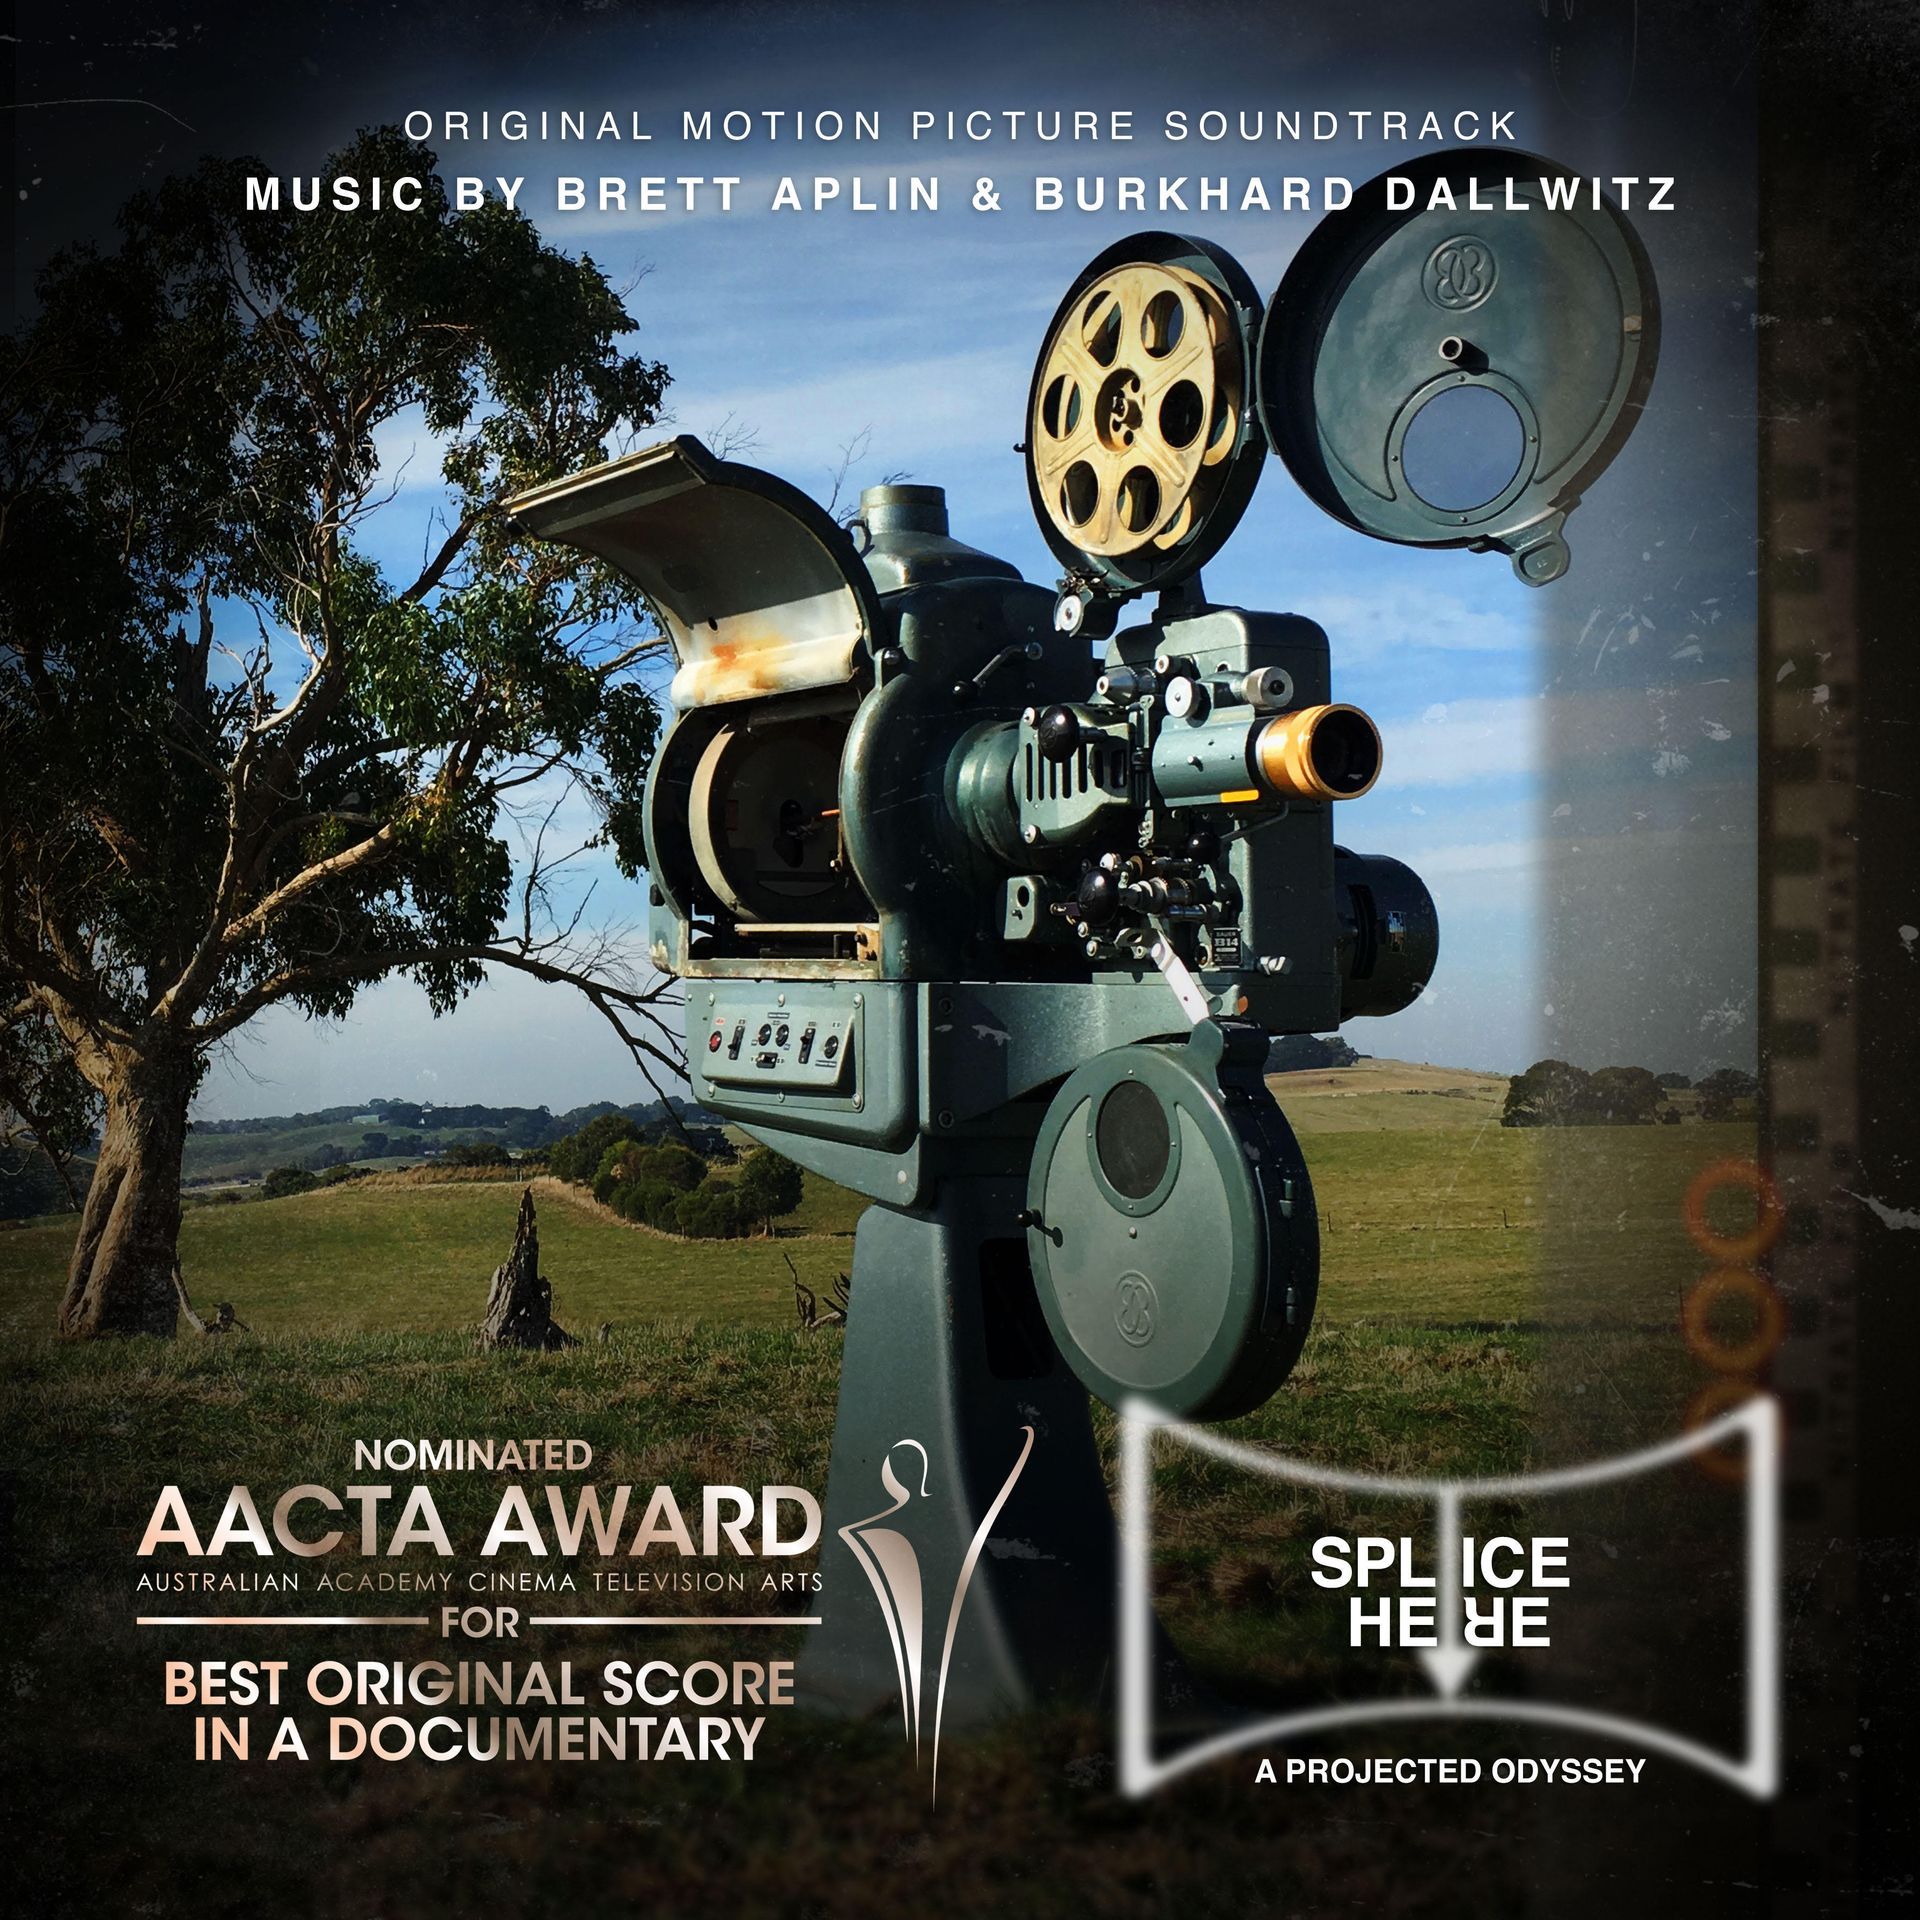 a poster for a projected odyssey which won the aacta award for best original score in a documentary